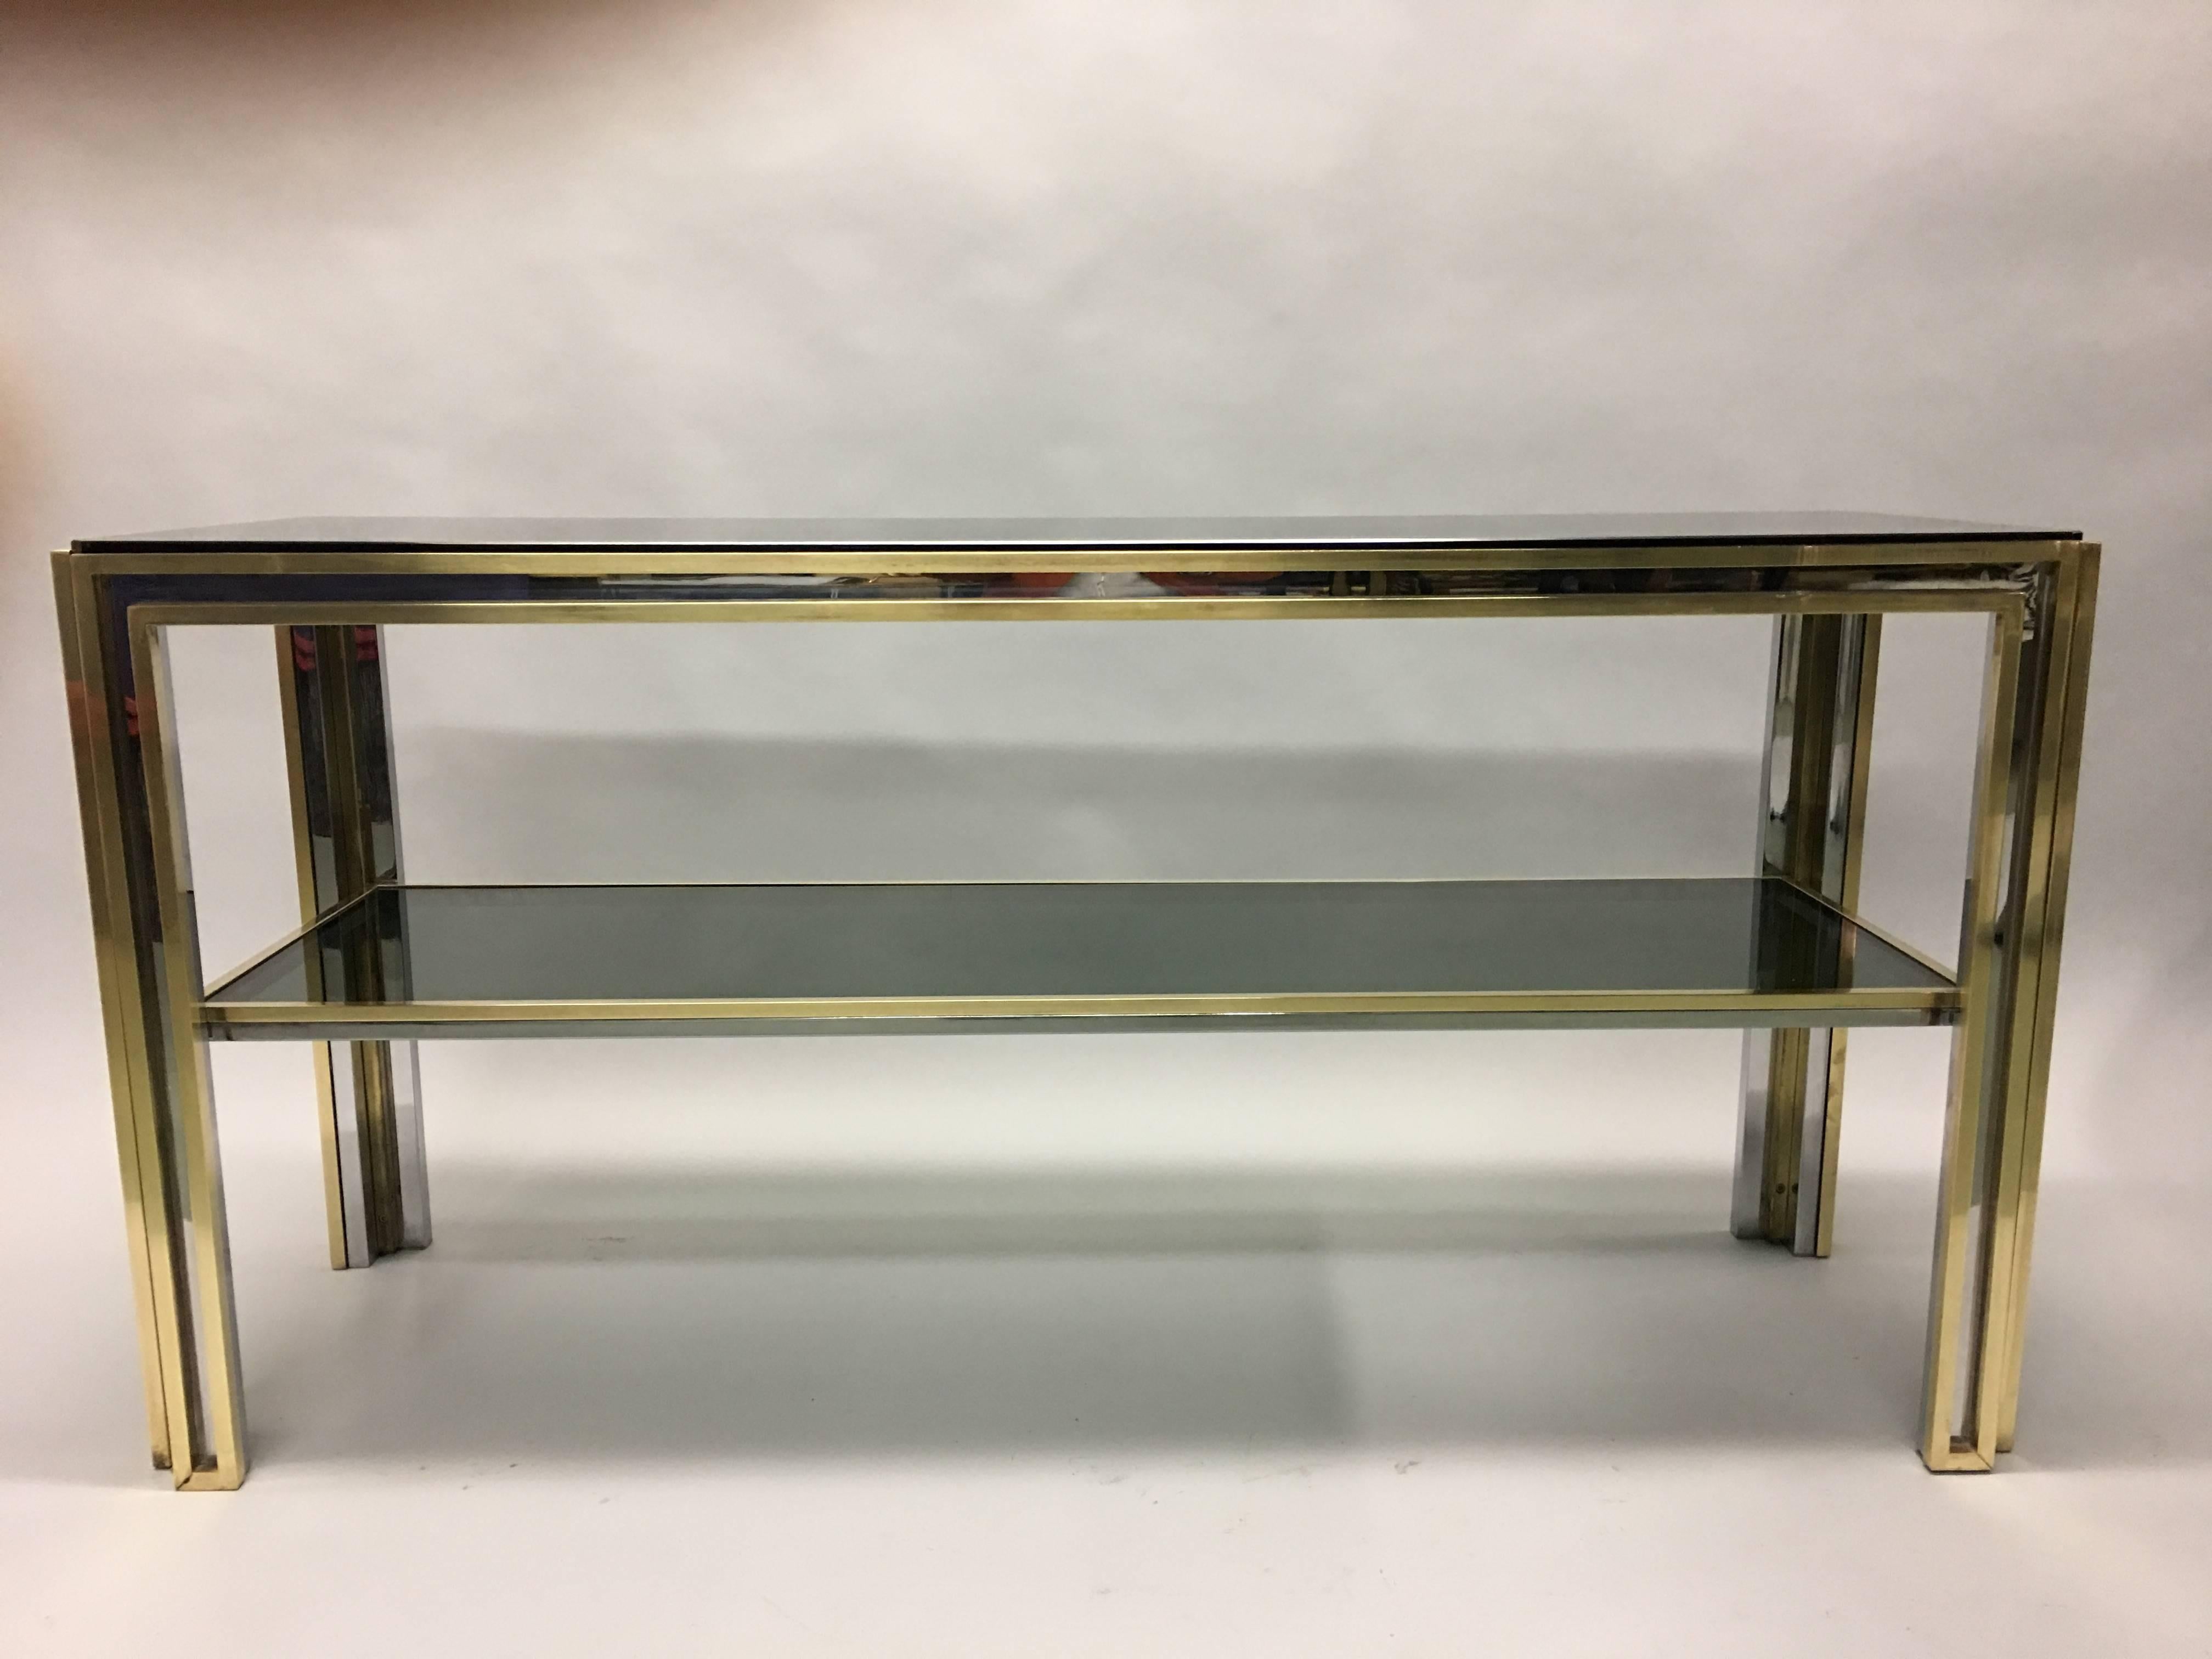 Italian Mid-Century Modern Brass and Chrome Console / Sofa Table by Willy Rizzo In Good Condition For Sale In New York, NY